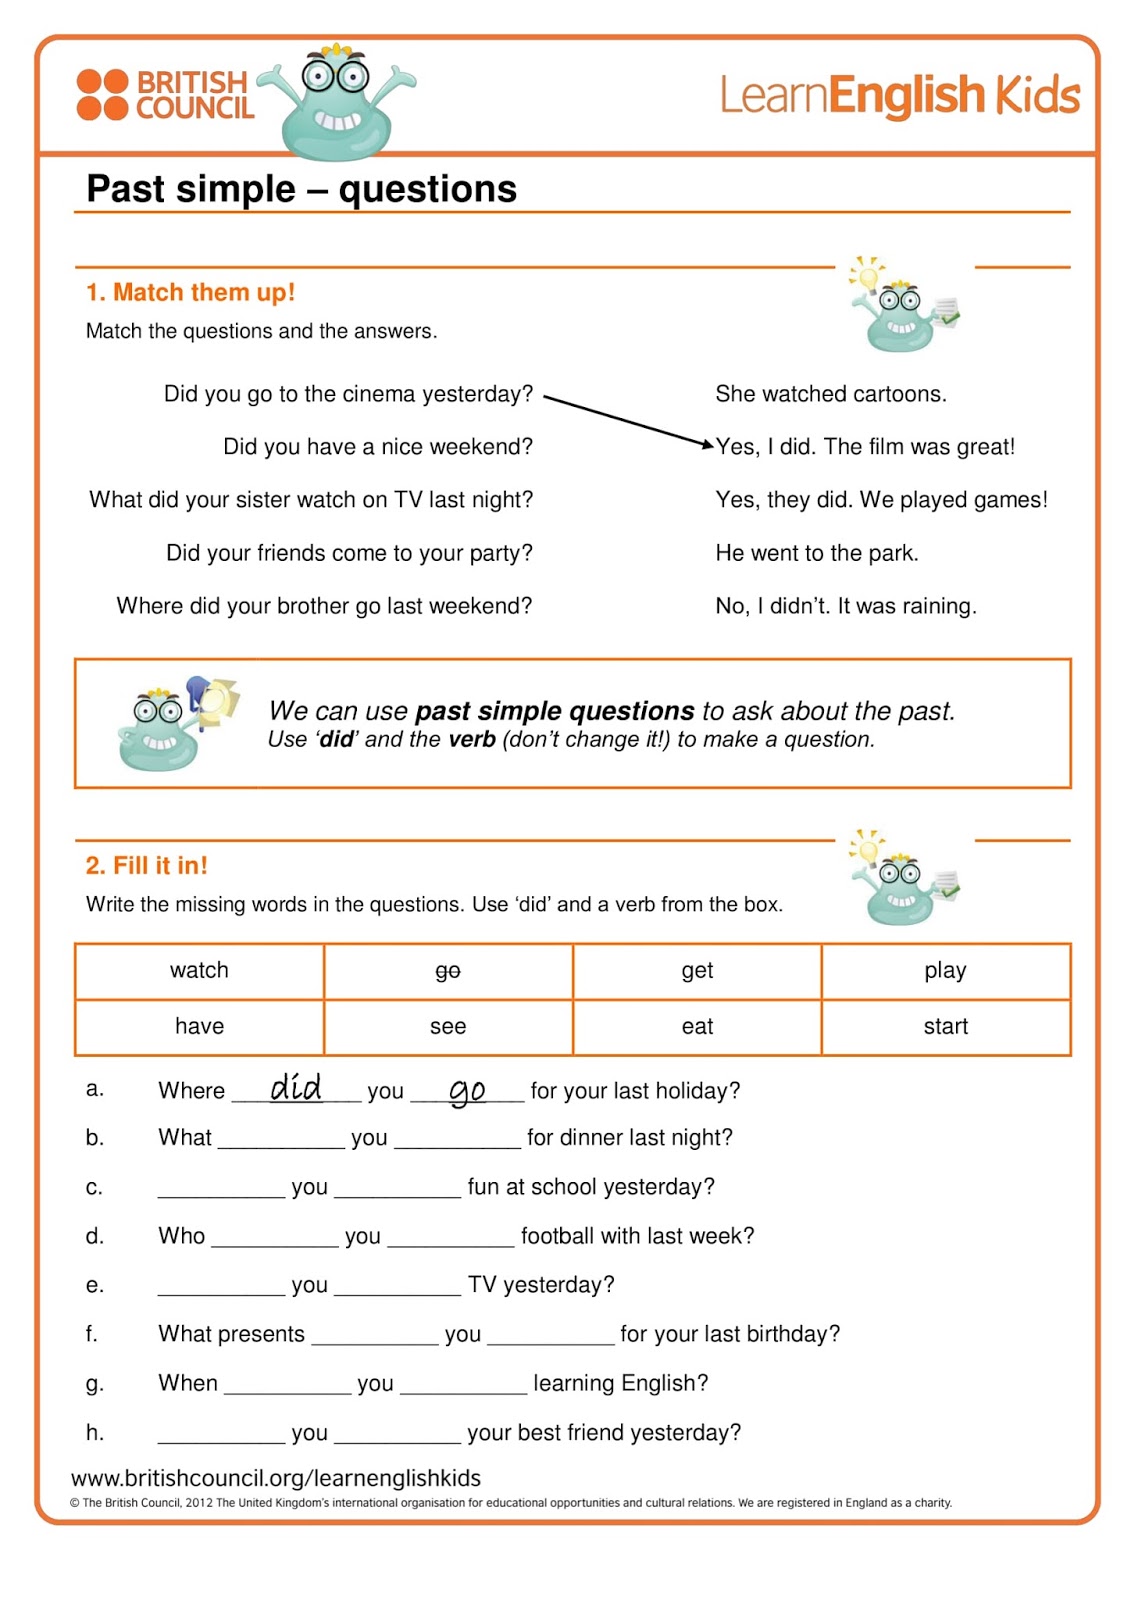 Use the words and form questions. British Council for Kids past simple questions. Past simple вопросы Worksheets. Past simple английский Worksheets. Специальные вопросы в past simple Worksheets.